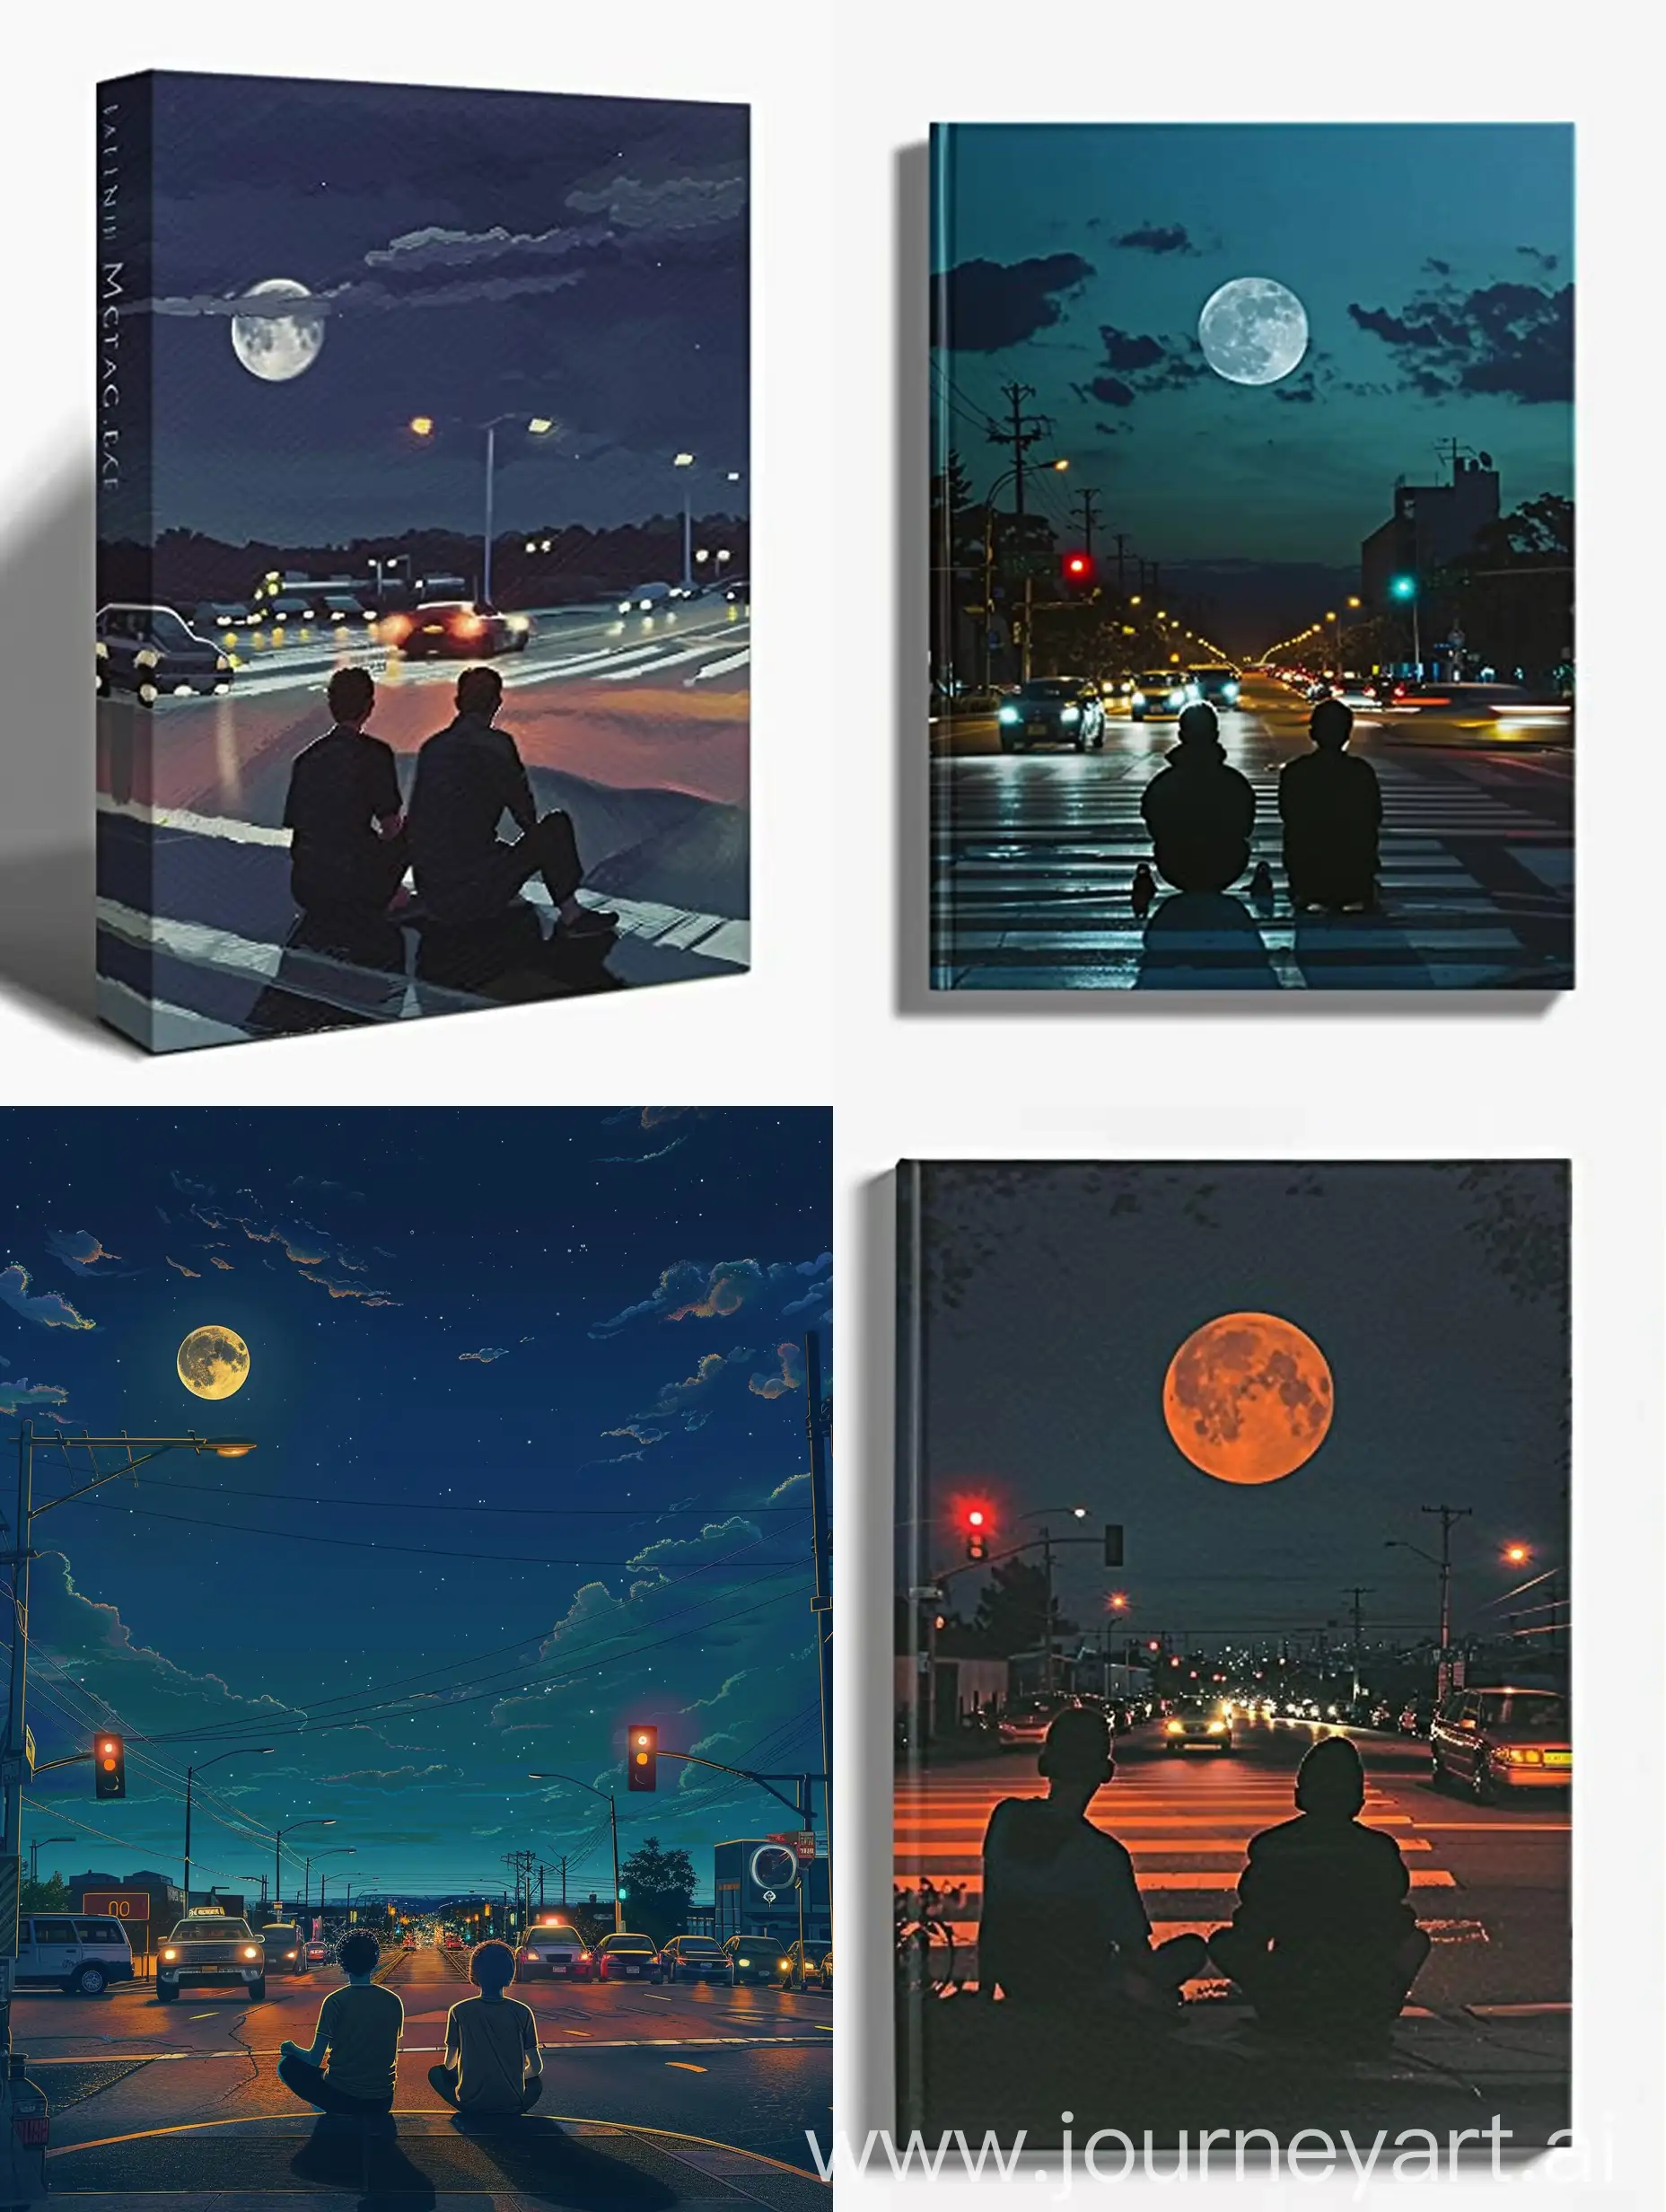 Urban-Night-Scene-Figures-at-Intersection-with-Moonlight-and-Traffic